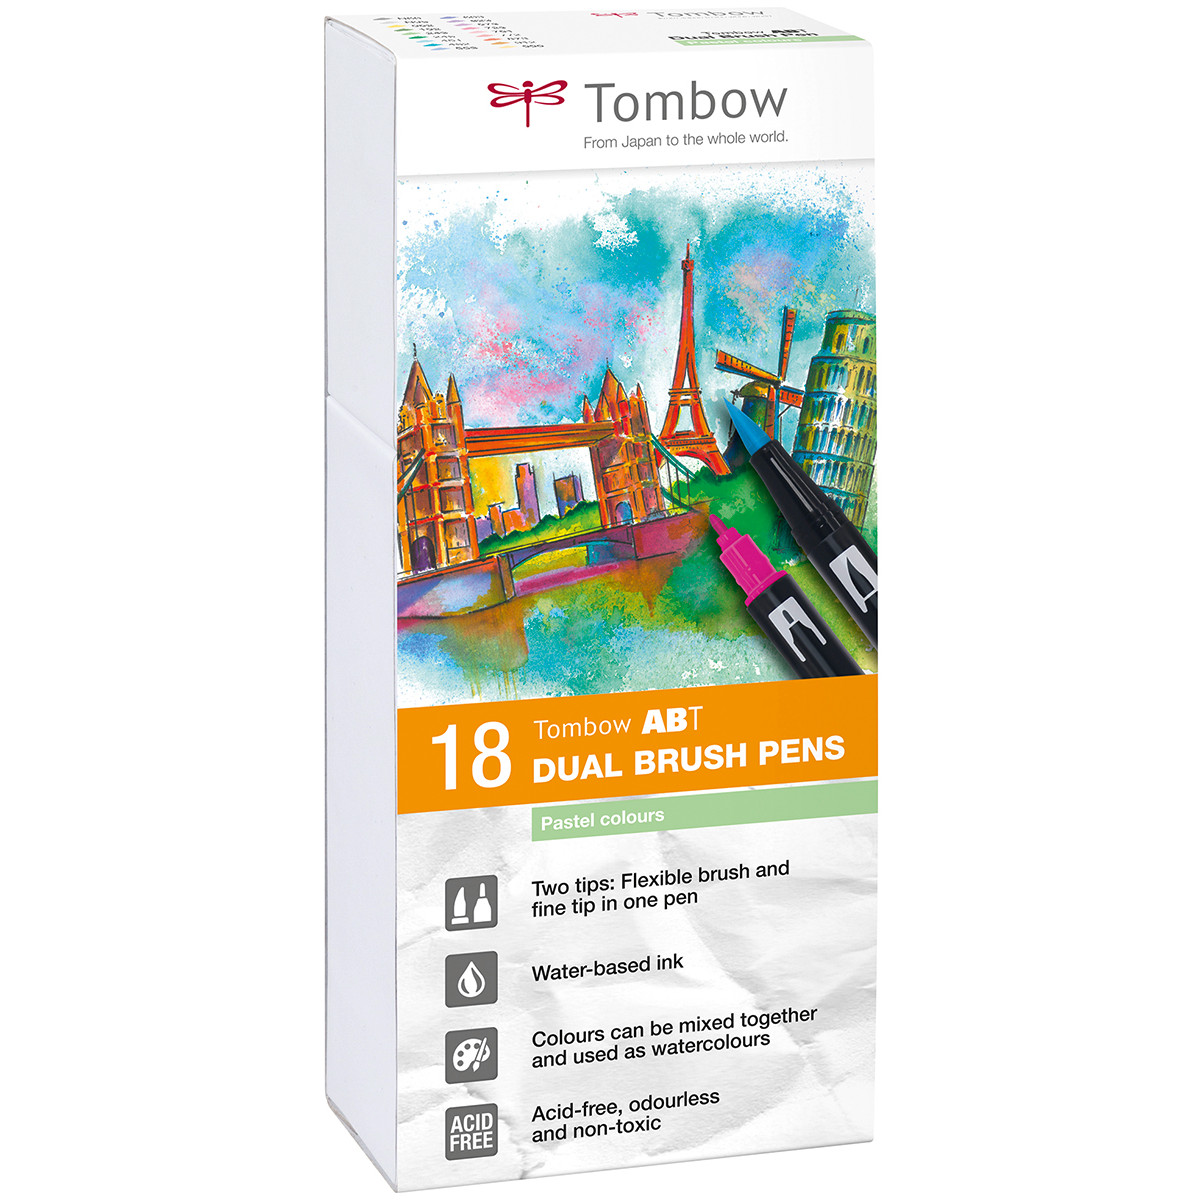 Tombow ABT Dual Brush Pens - Pastel Colours (Pack of 18)